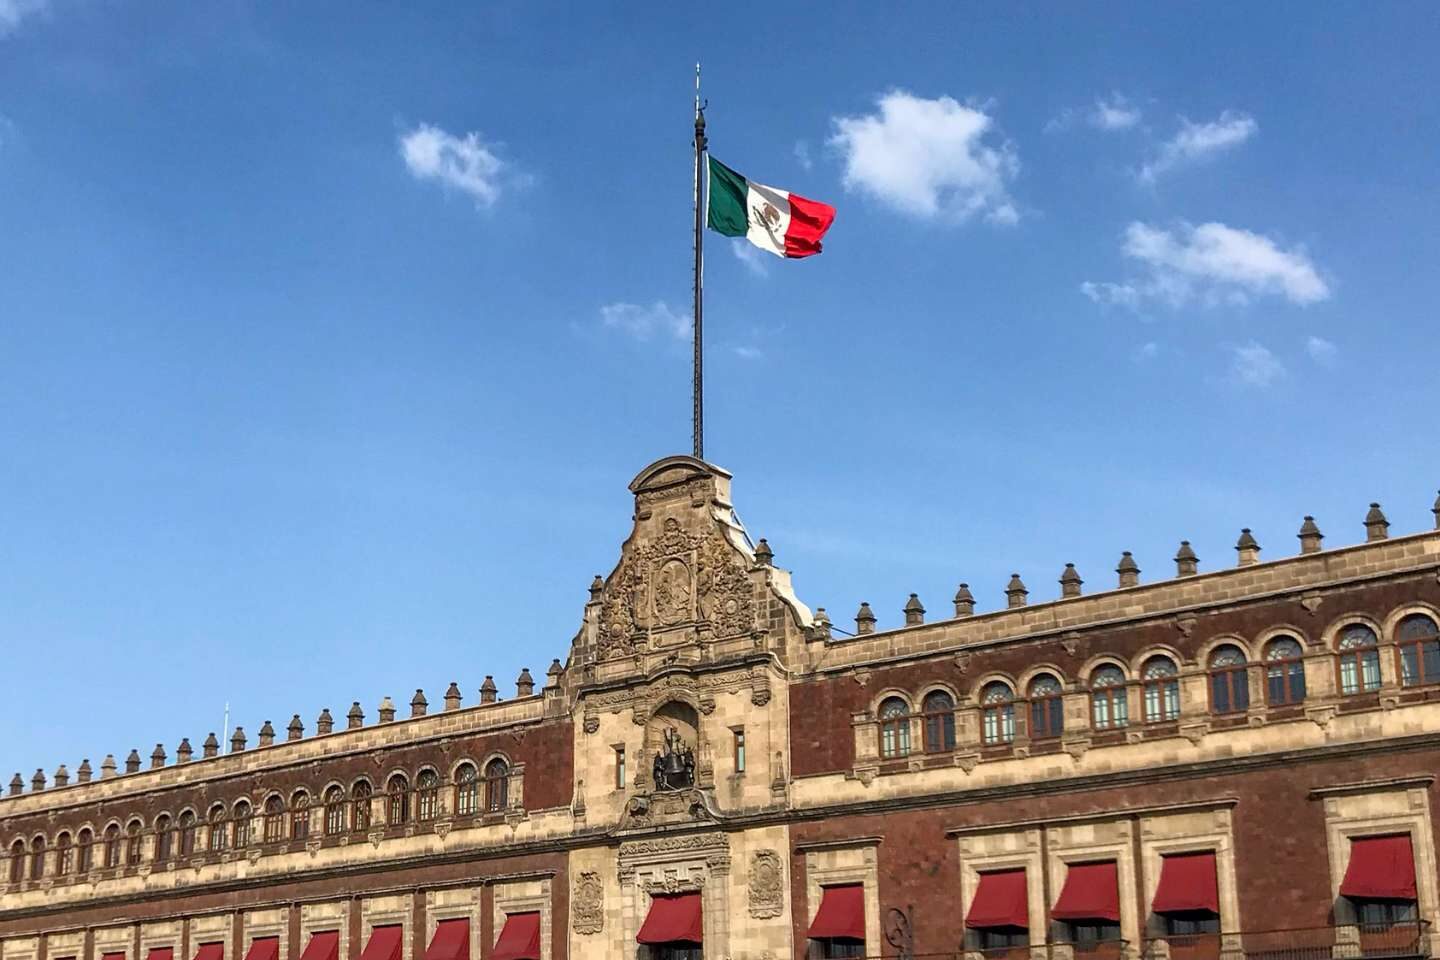 Fine weather in Mexico with waving flag